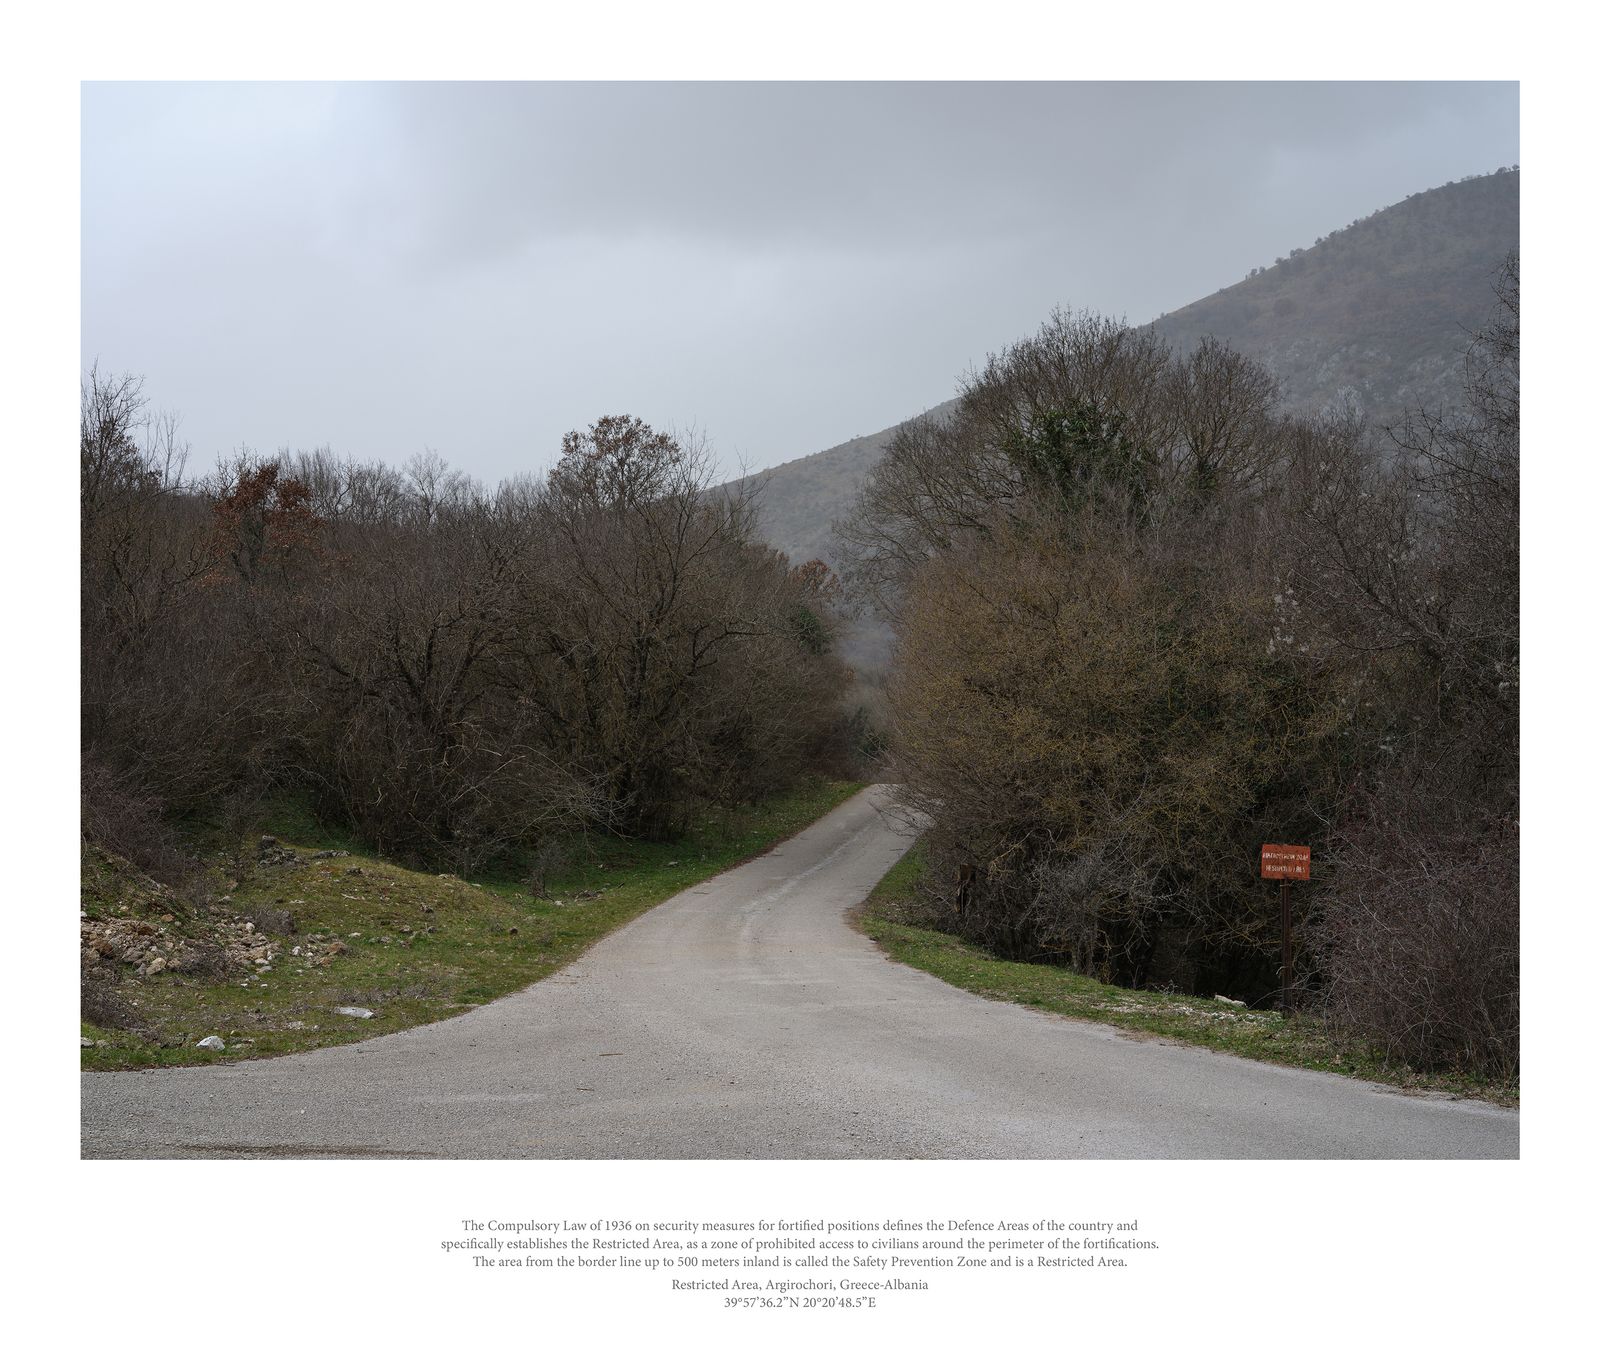 © Grigoris Digas - Image from the Borders photography project